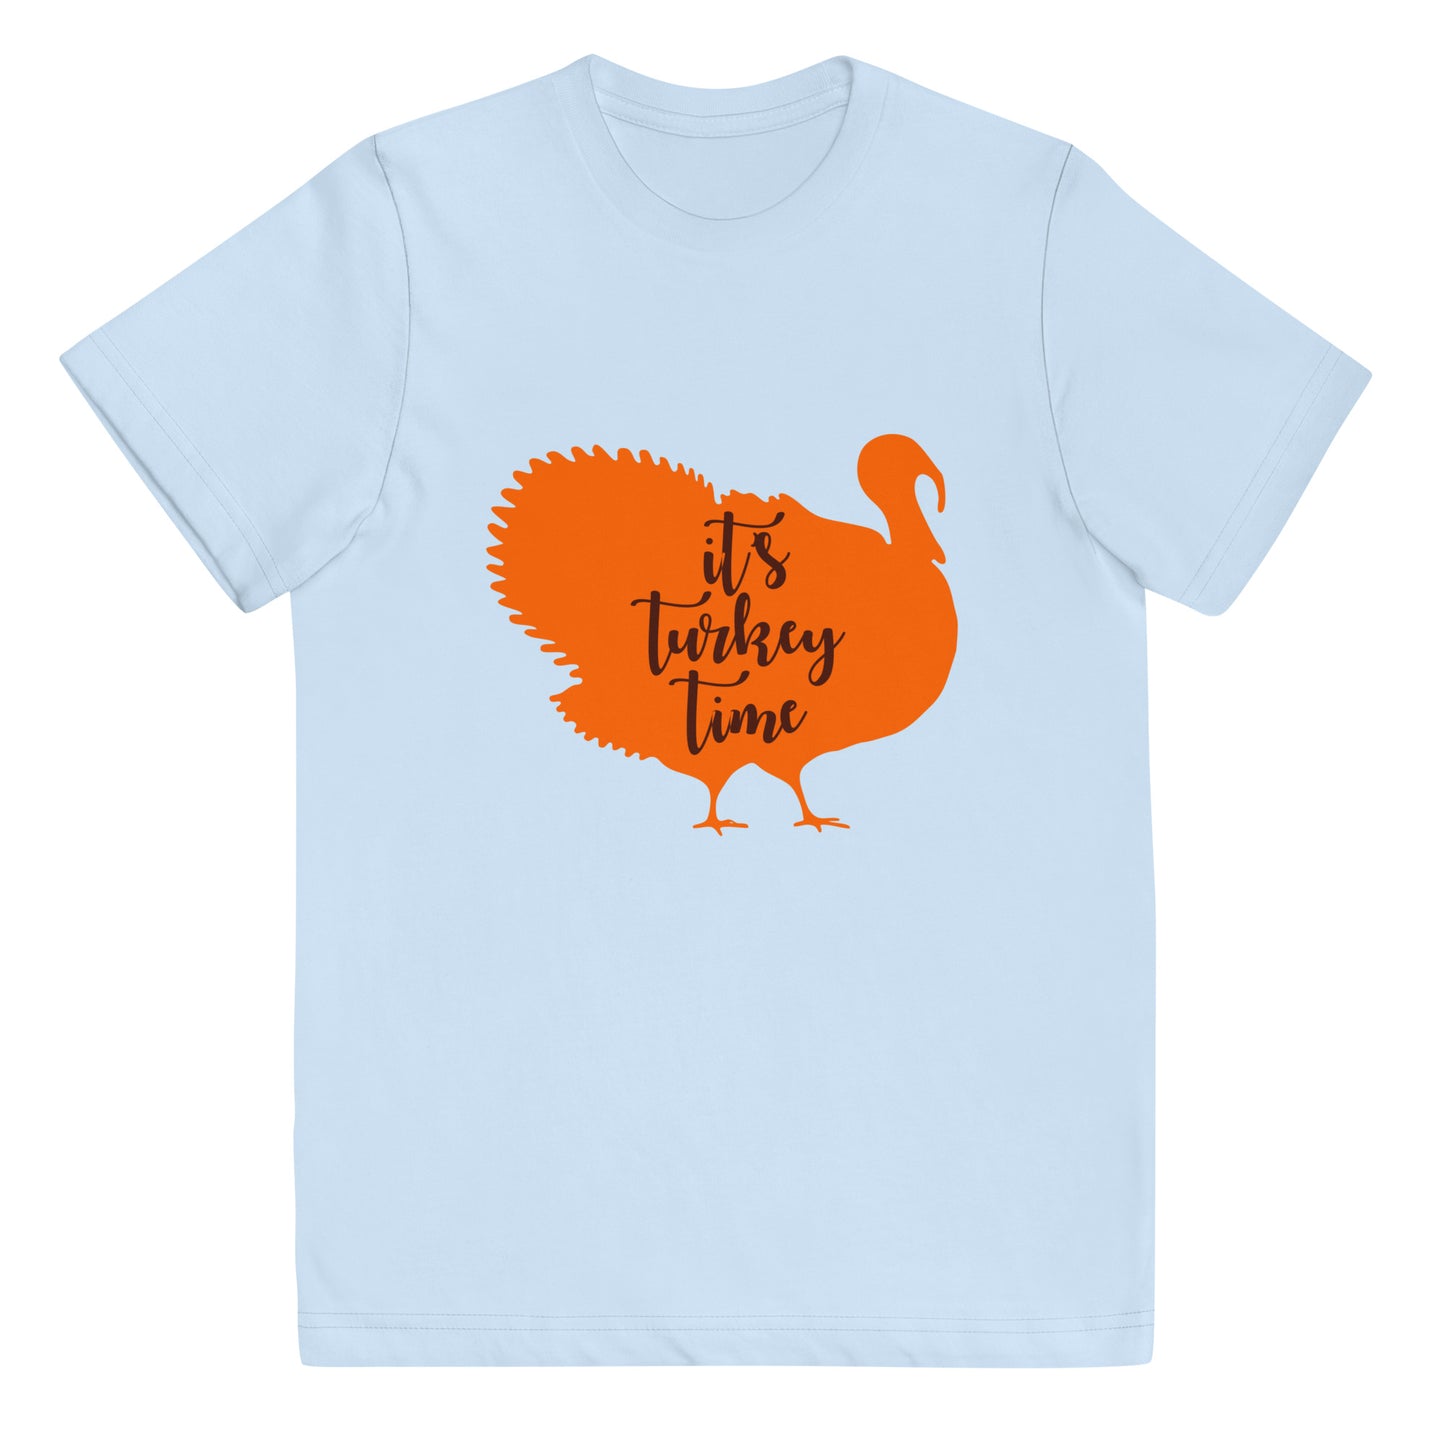 It's Turkey Time Youth jersey t-shirt